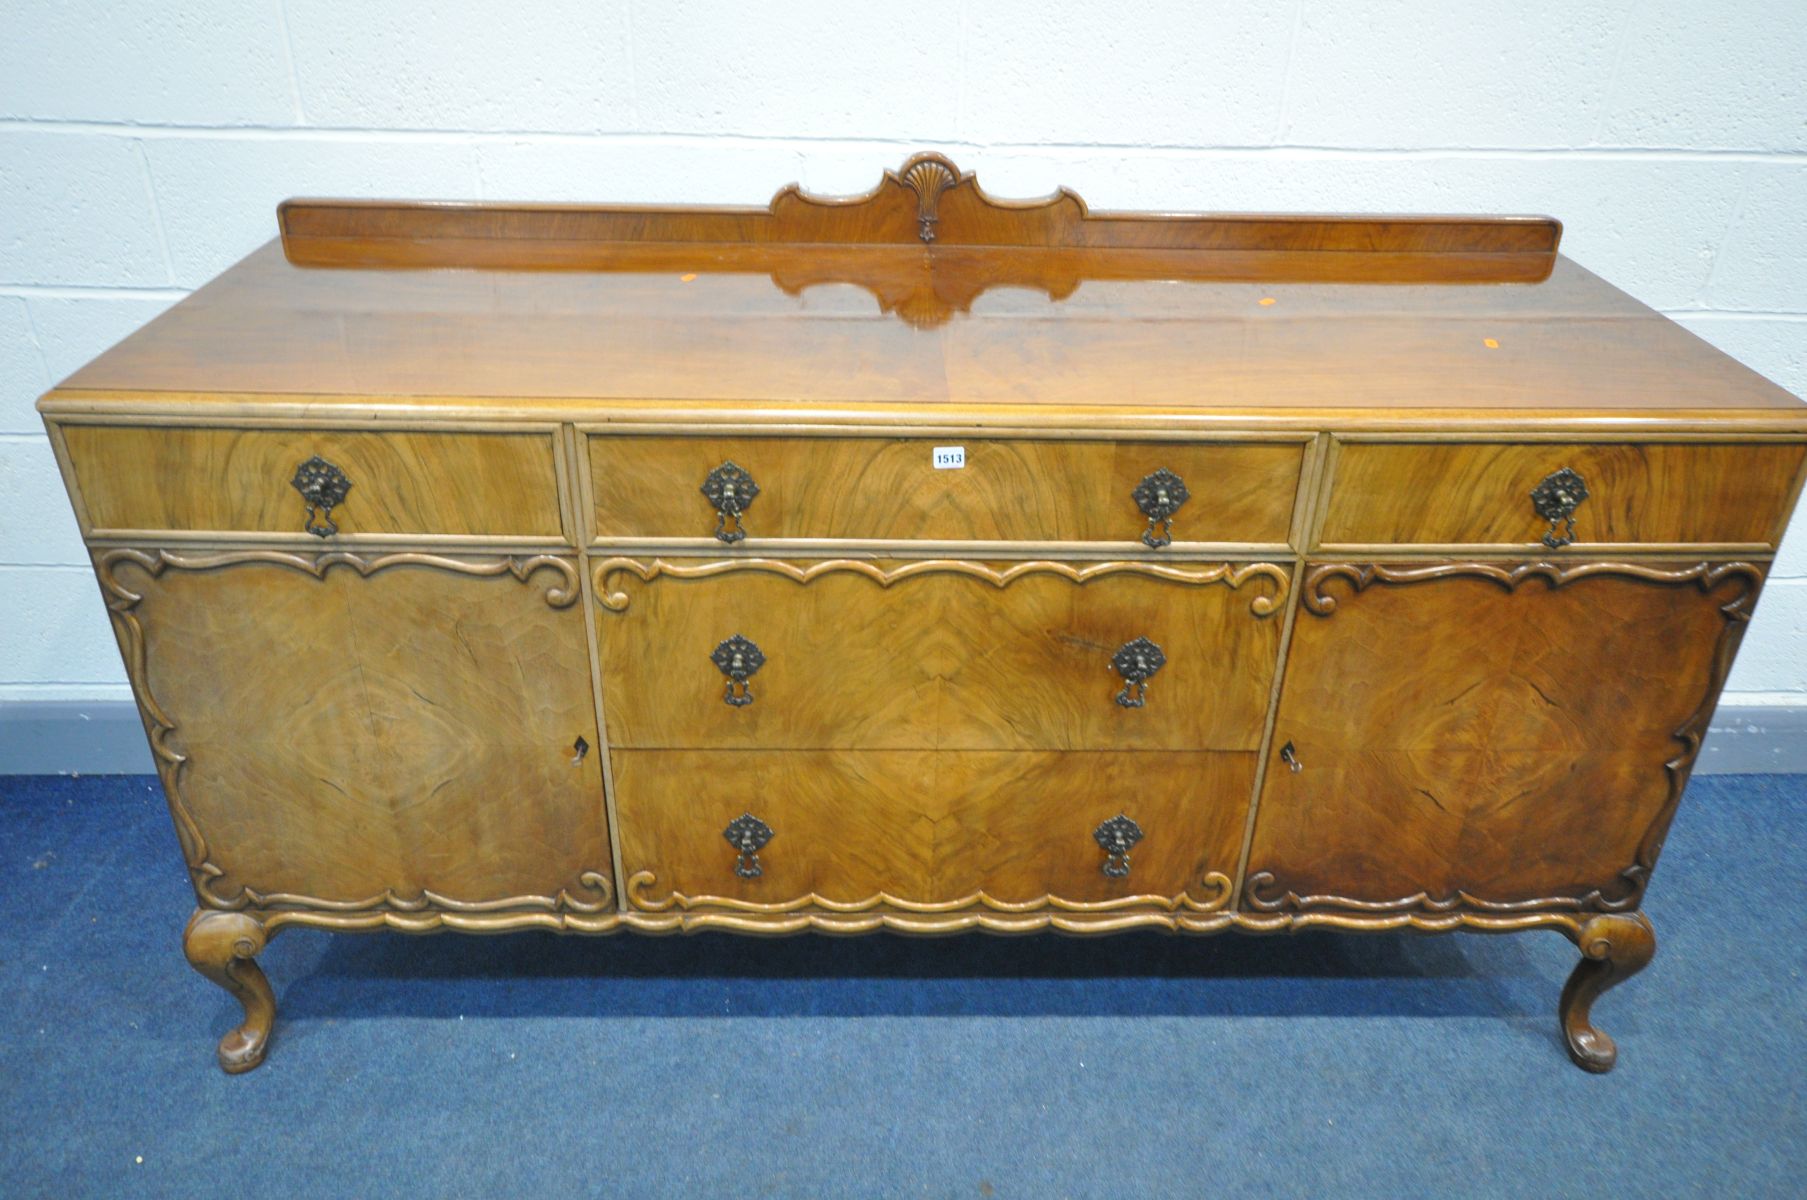 AN EARLY 20TH WALNUT QUEEN ANNE STYLE SIDEBOARD, with a raised back, an arrangement of drawers and